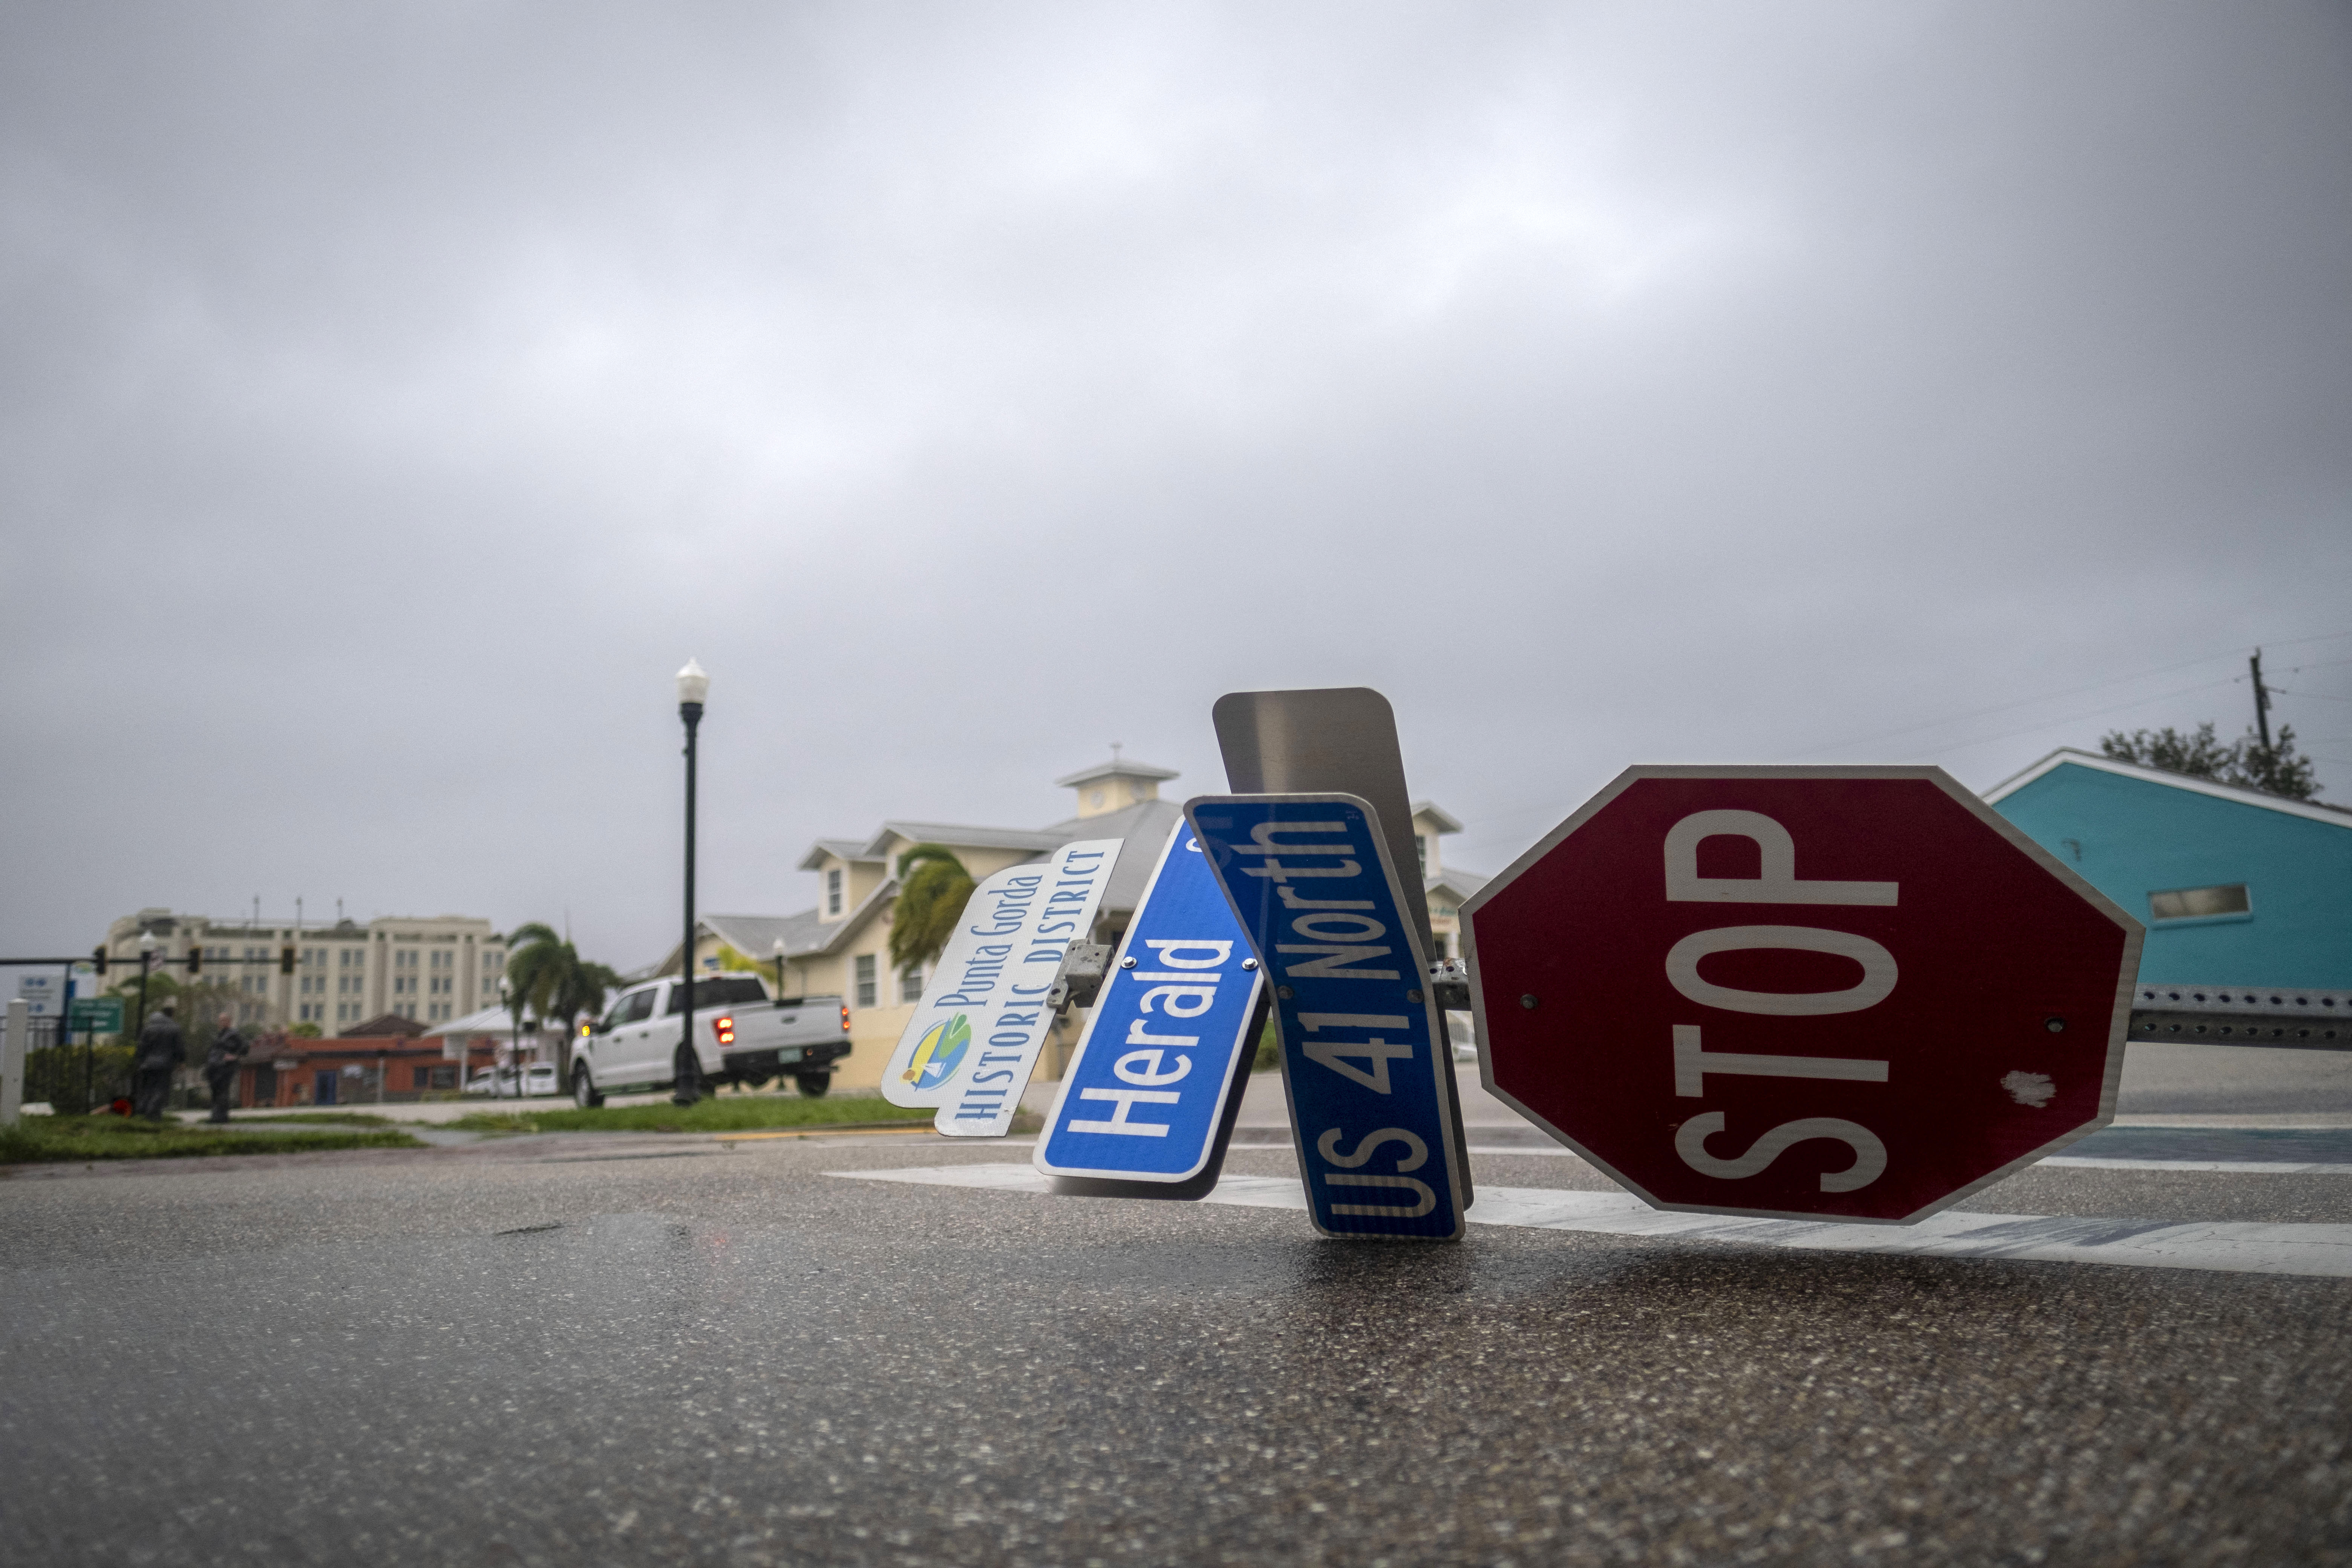 An overturned street sign is seen as the eye of Hurricane Ian passes in Punta Gorda, Florida